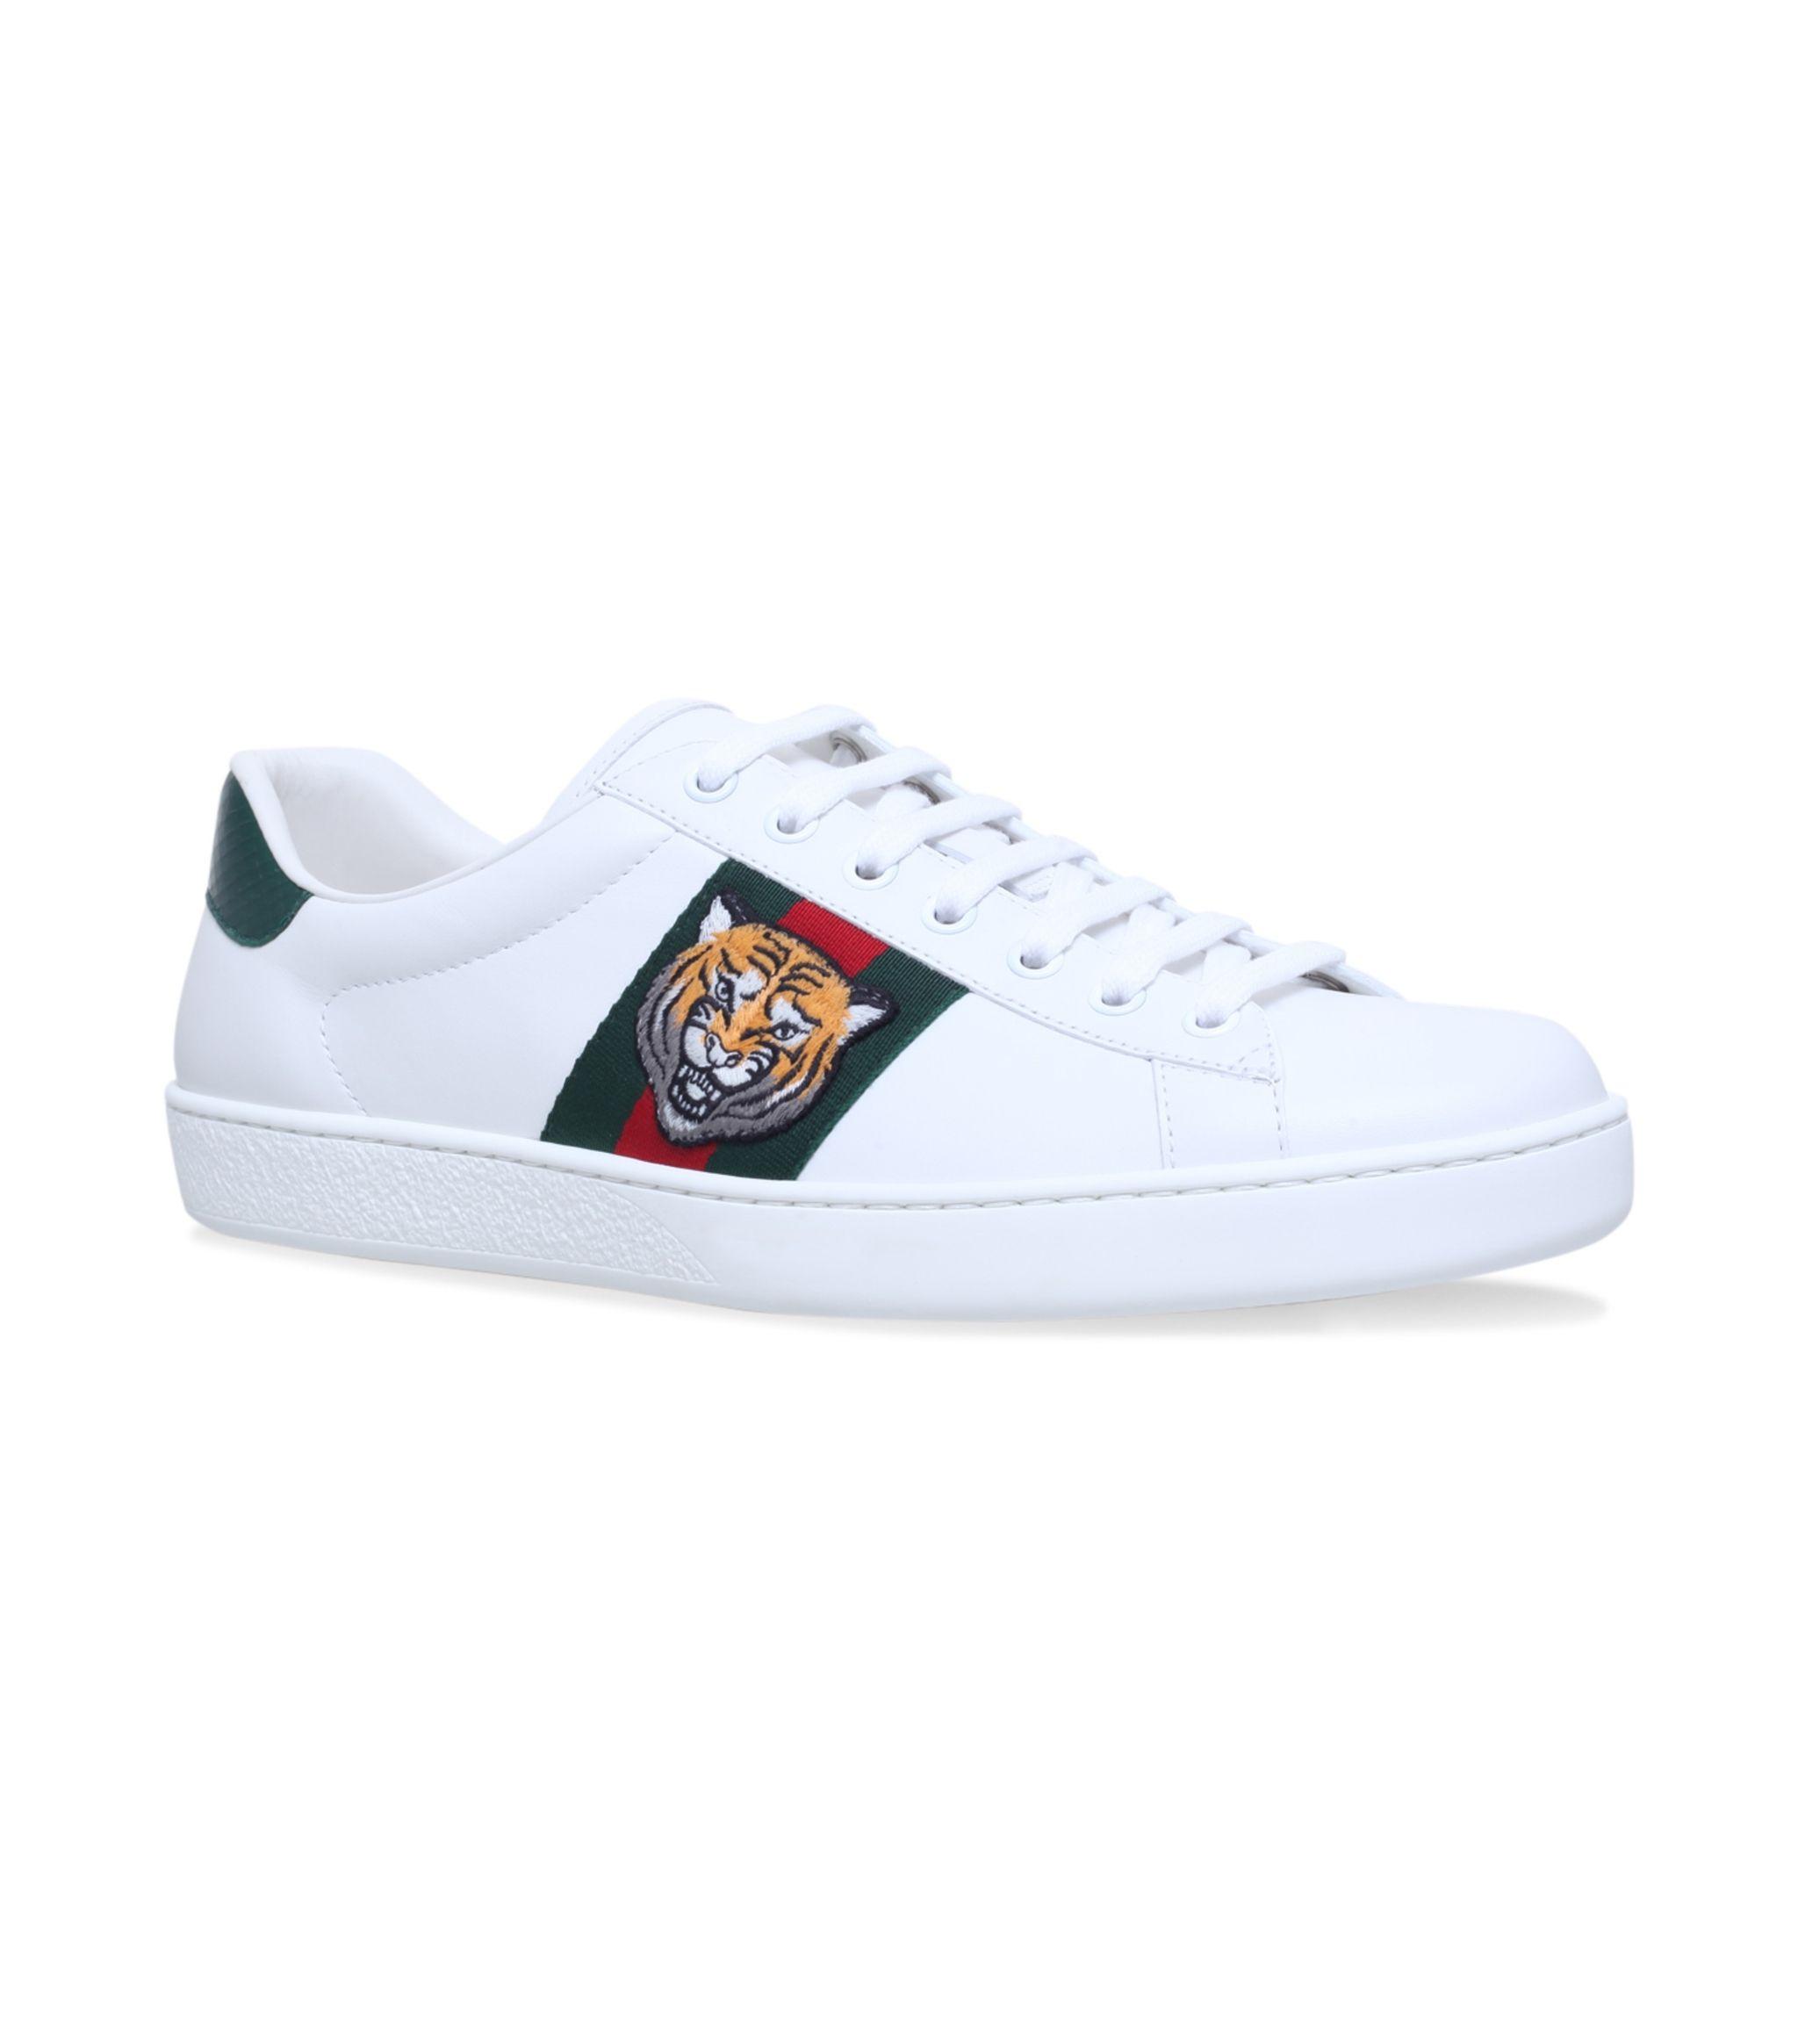 Gucci Leather Tiger Ace Sneakers in Blue for Men - Lyst